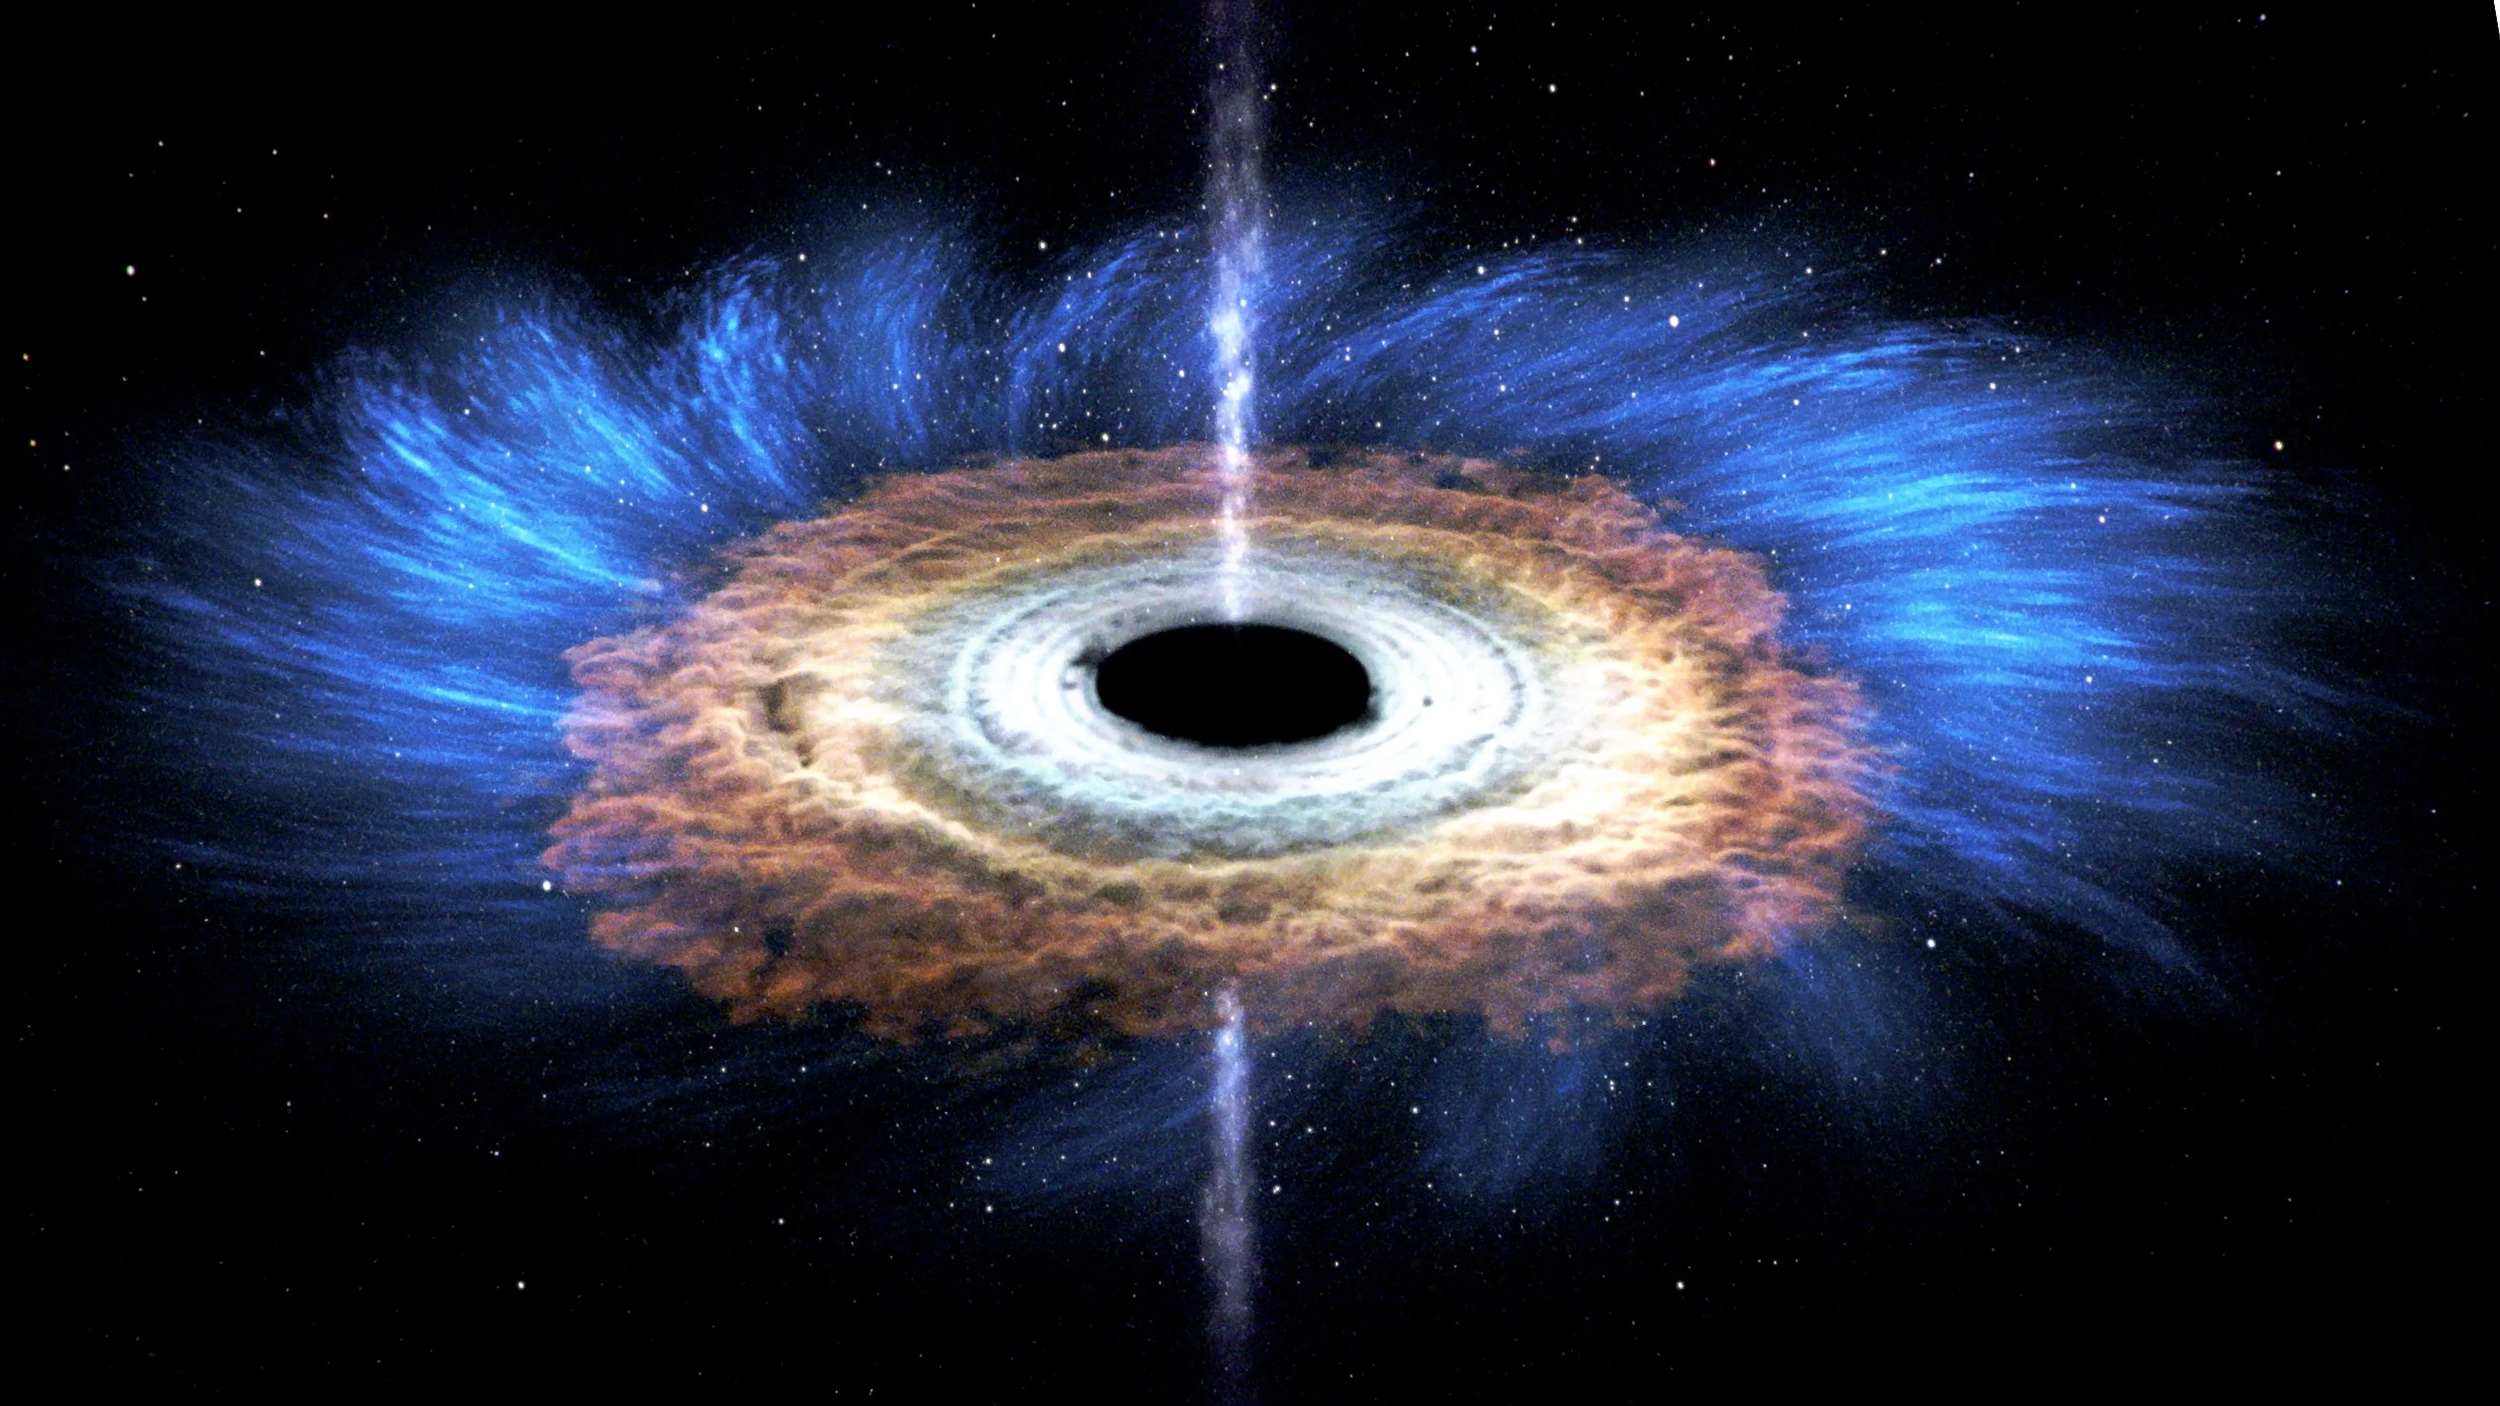 An artist's illustration of a supermassive black hole with an accretion disk and relativistic jets.